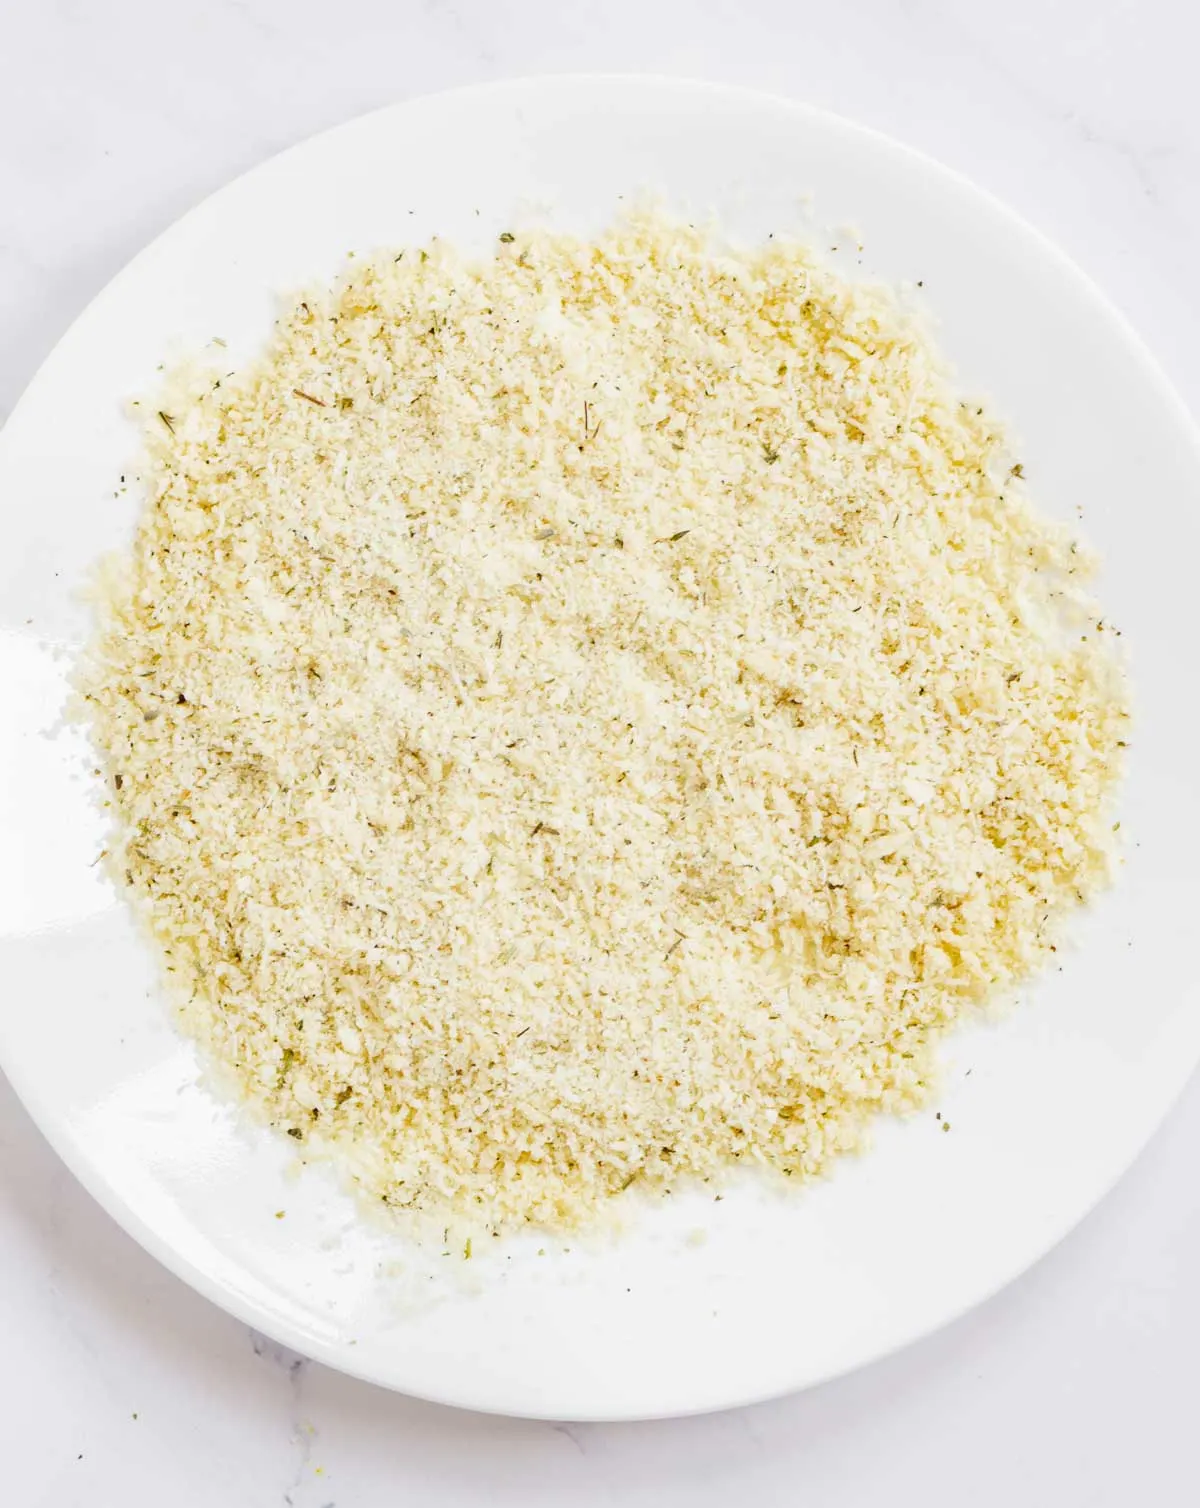 Plate with grated Parmesan, panko breadcrumbs, and herbs de Provence mixed together.